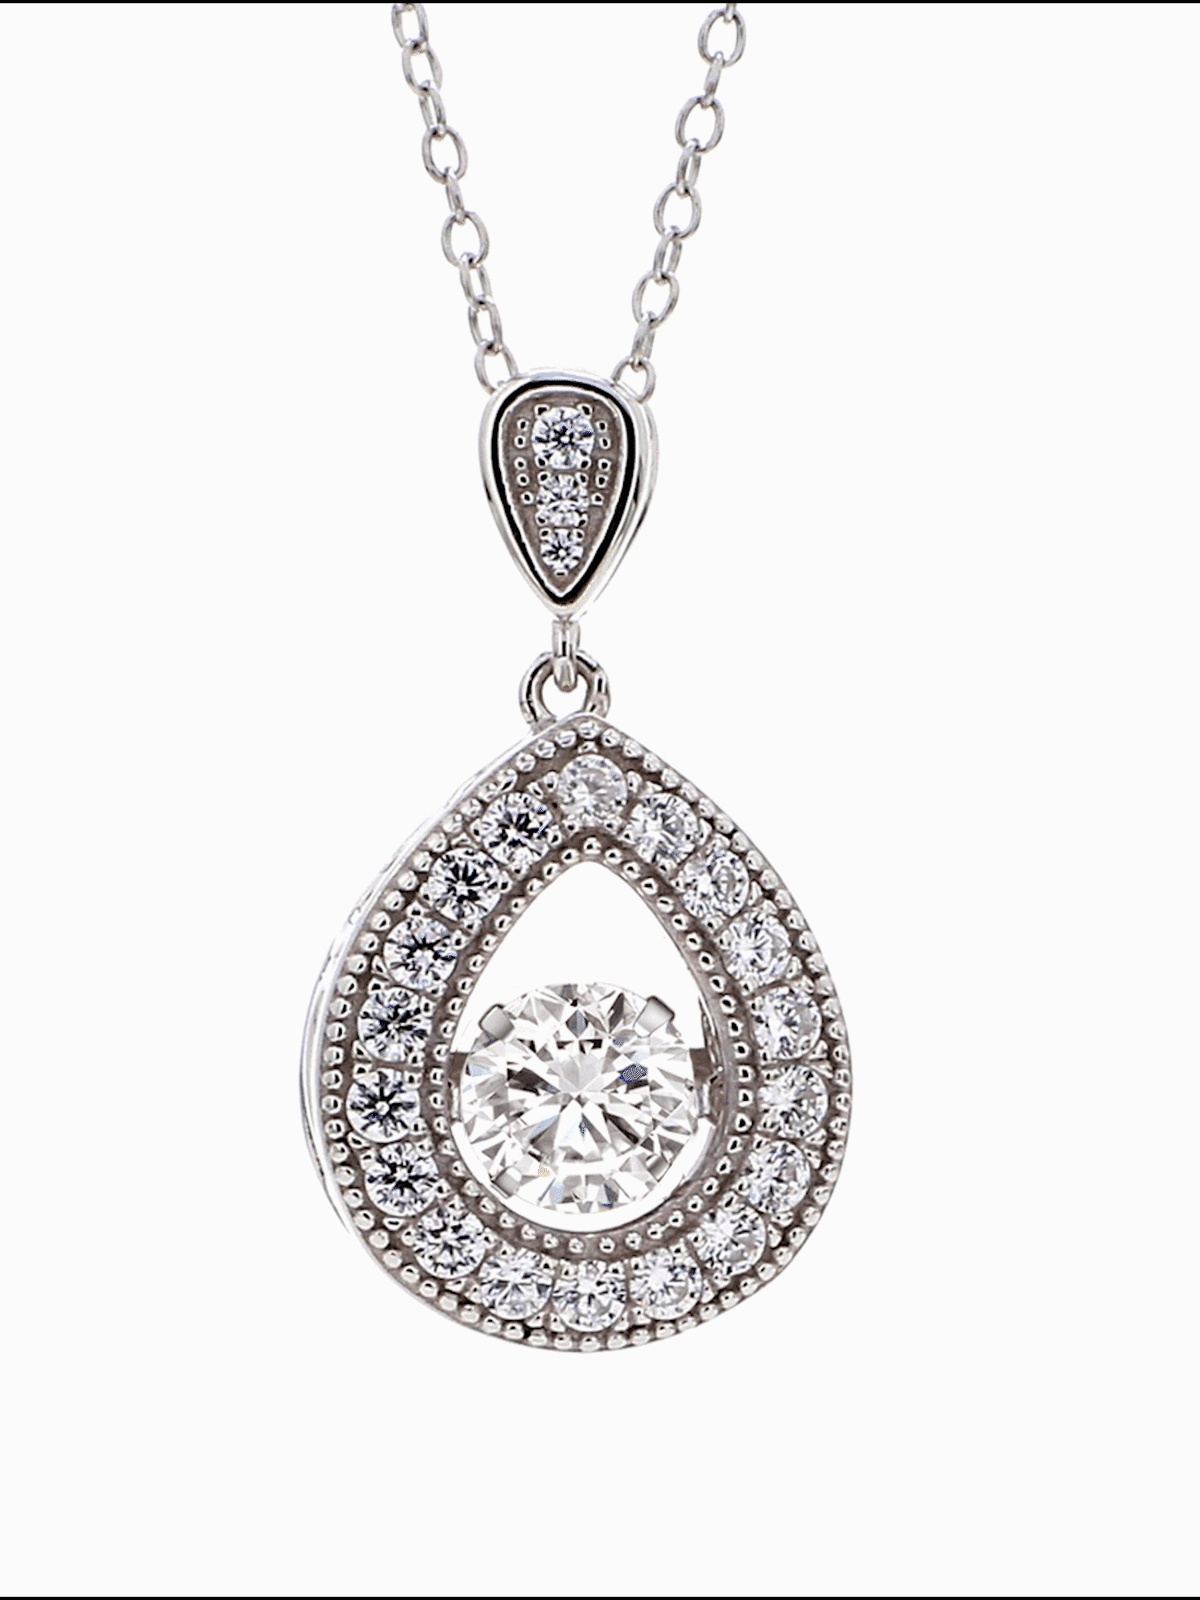 DANCING STONE PEAR SHAPE PENDANT WITH PURE SILVER CHAIN